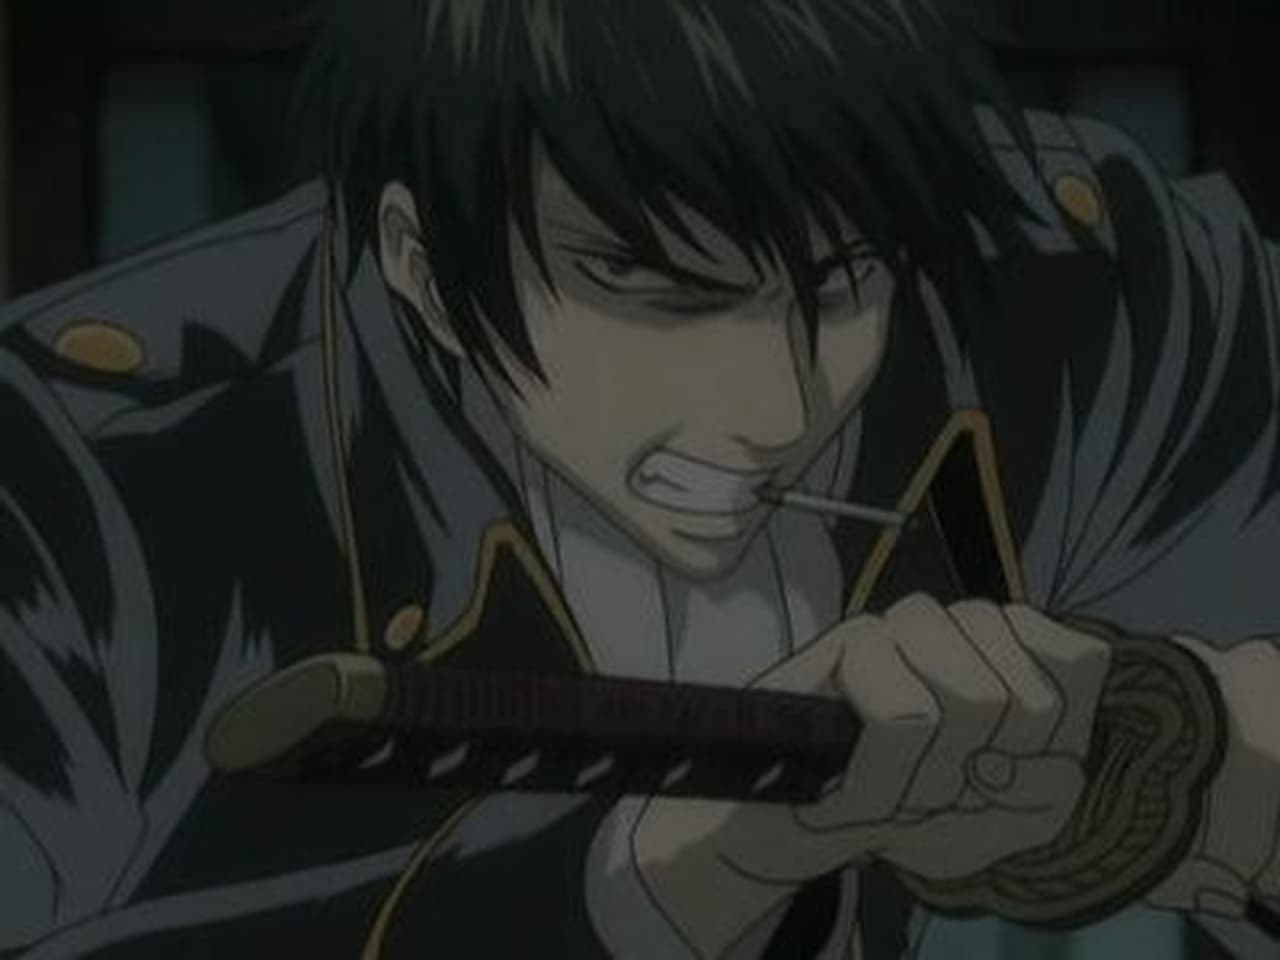 Gintama - Season 3 Episode 5 : Important Things Are Hard To See